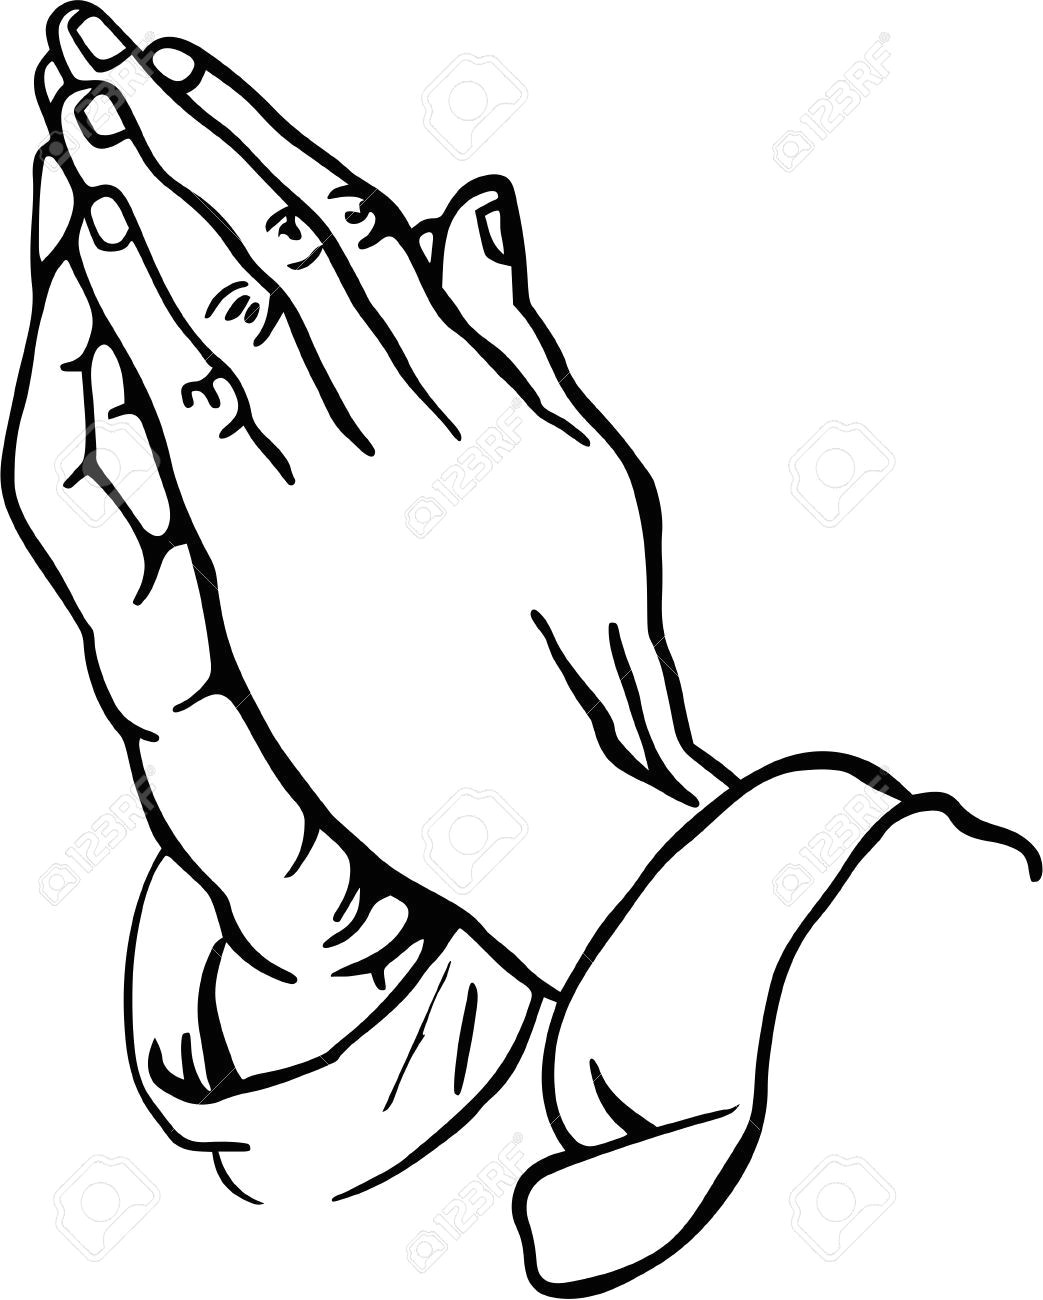 Drawing Of Praying Hands with Cross Praying Hands Clipart Stock Photo Picture and Royalty Free Image